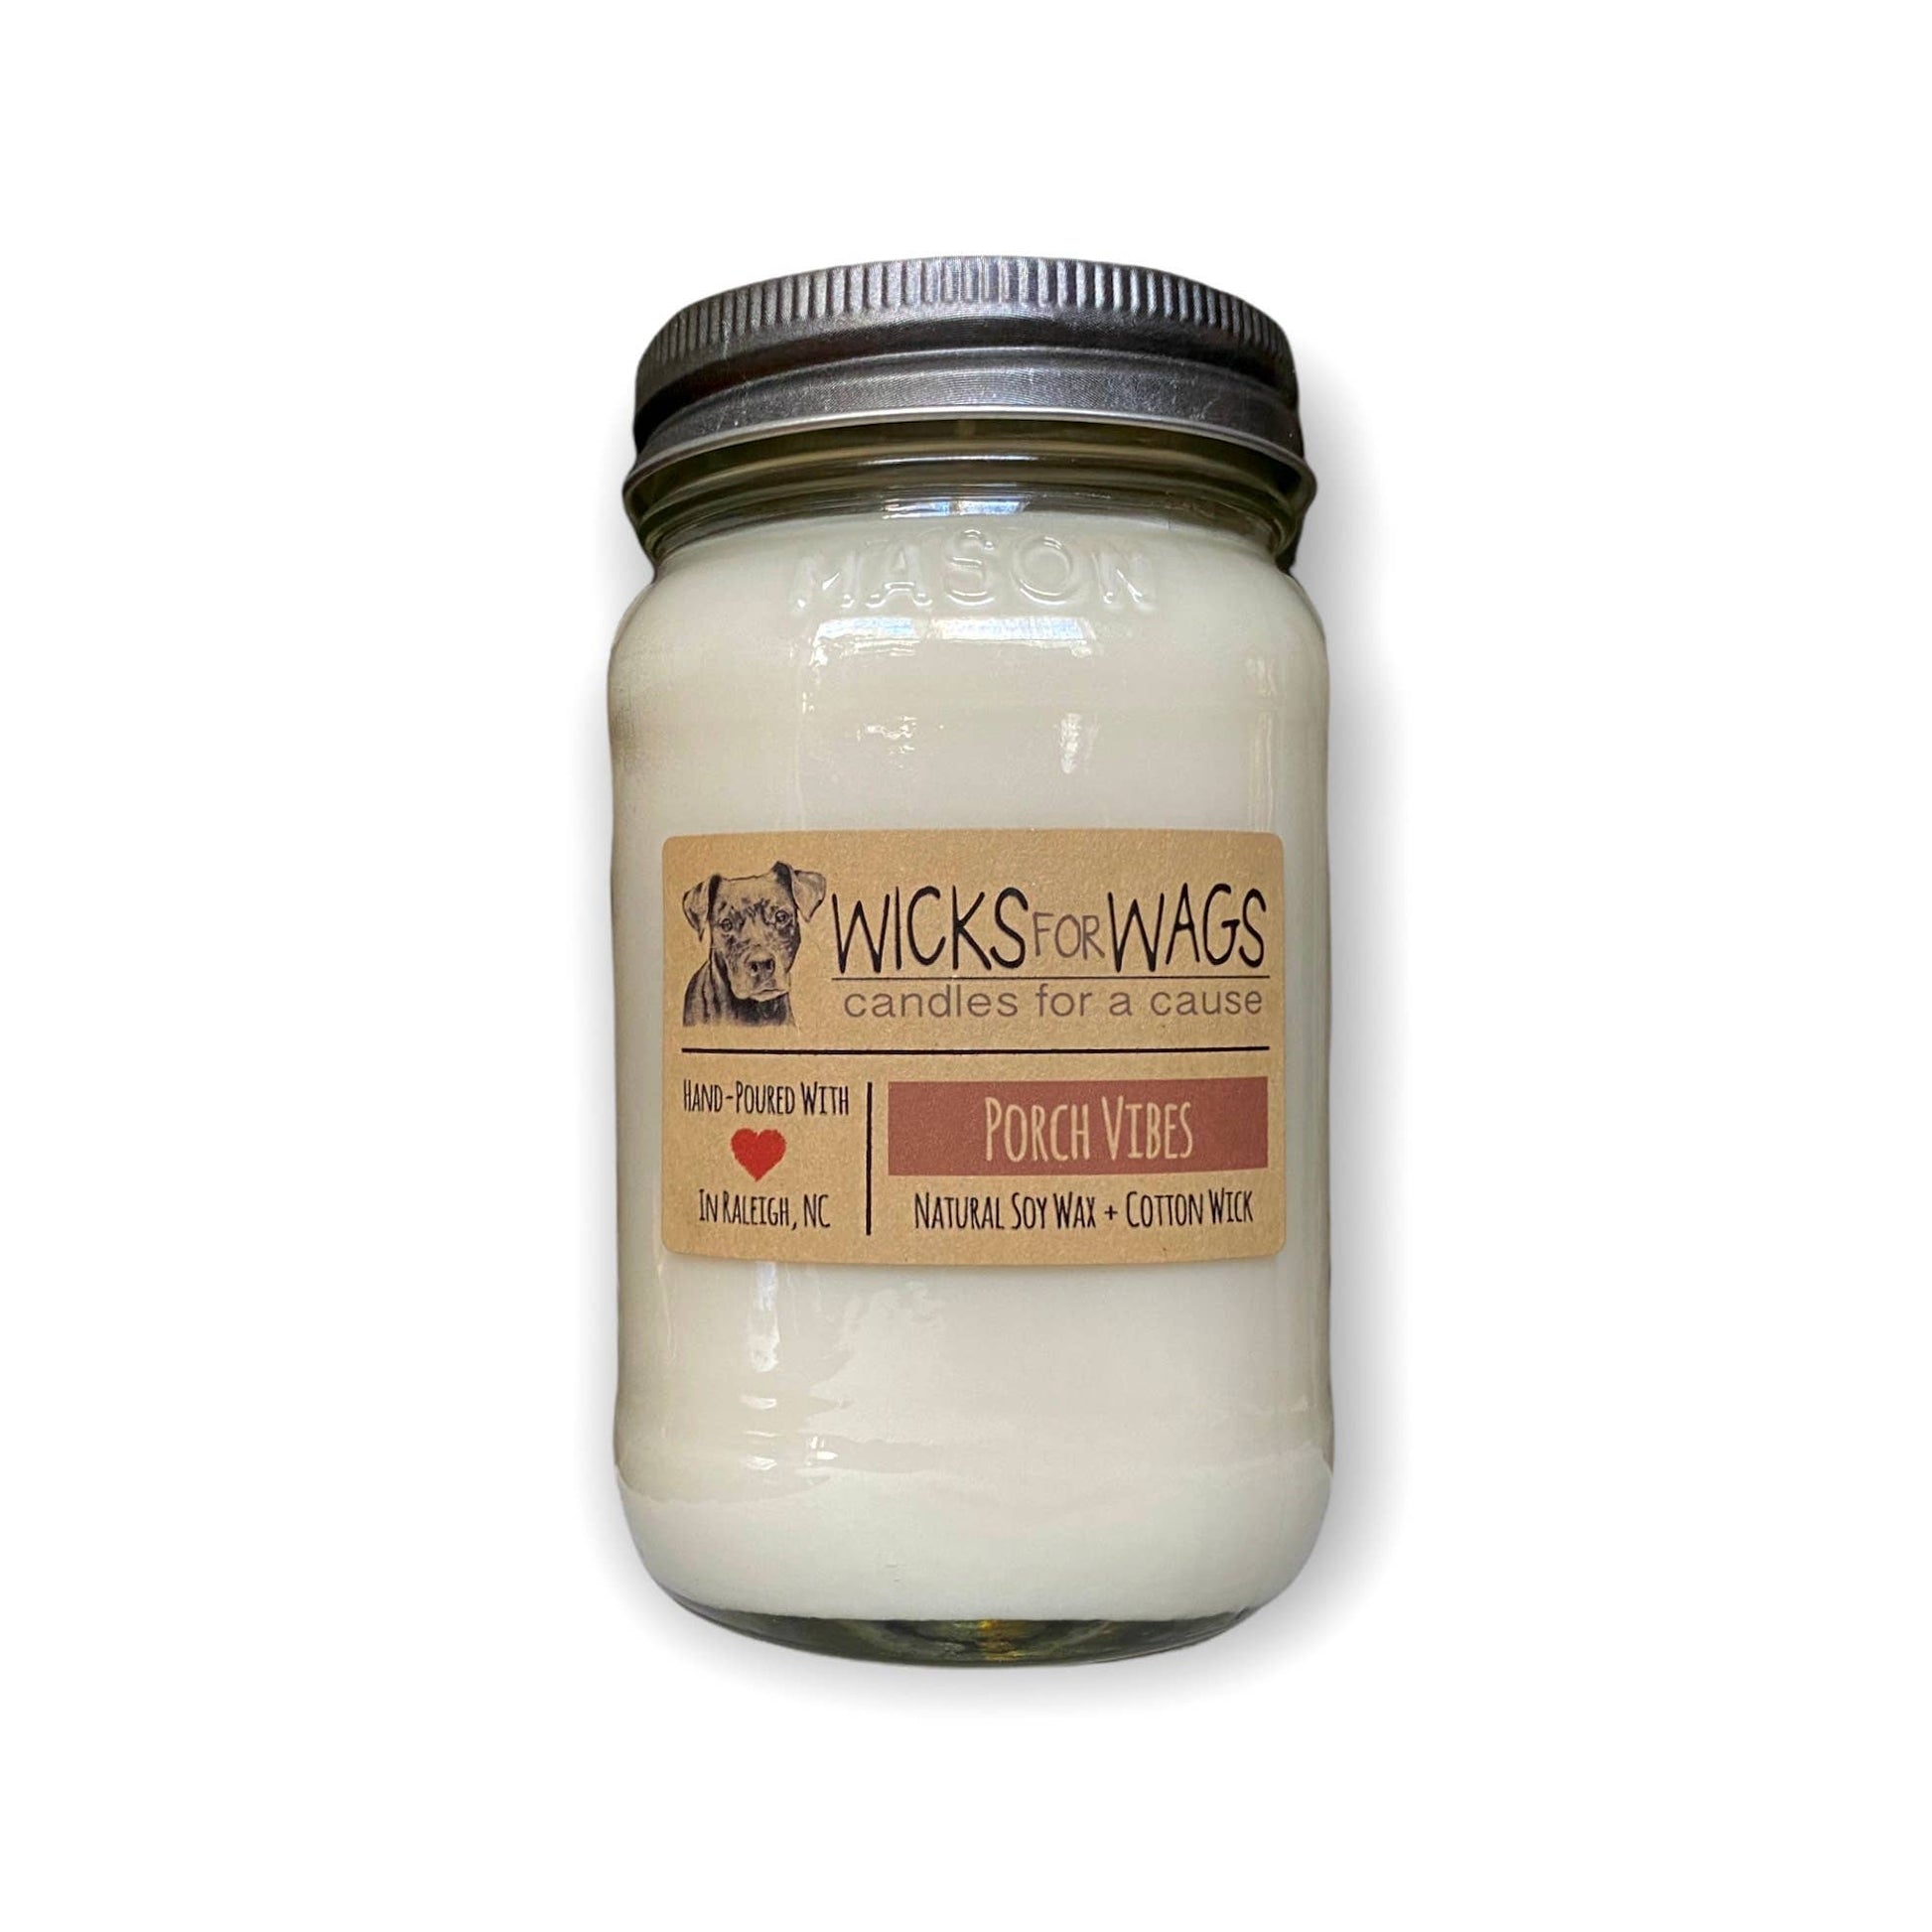 Wicks for Wags Candles - Porch Vibes | 14 oz Candle | Mason Jar Soy Candle  Wicks for Wags Candles   -better made easy-eco-friendly-sustainable-gifting